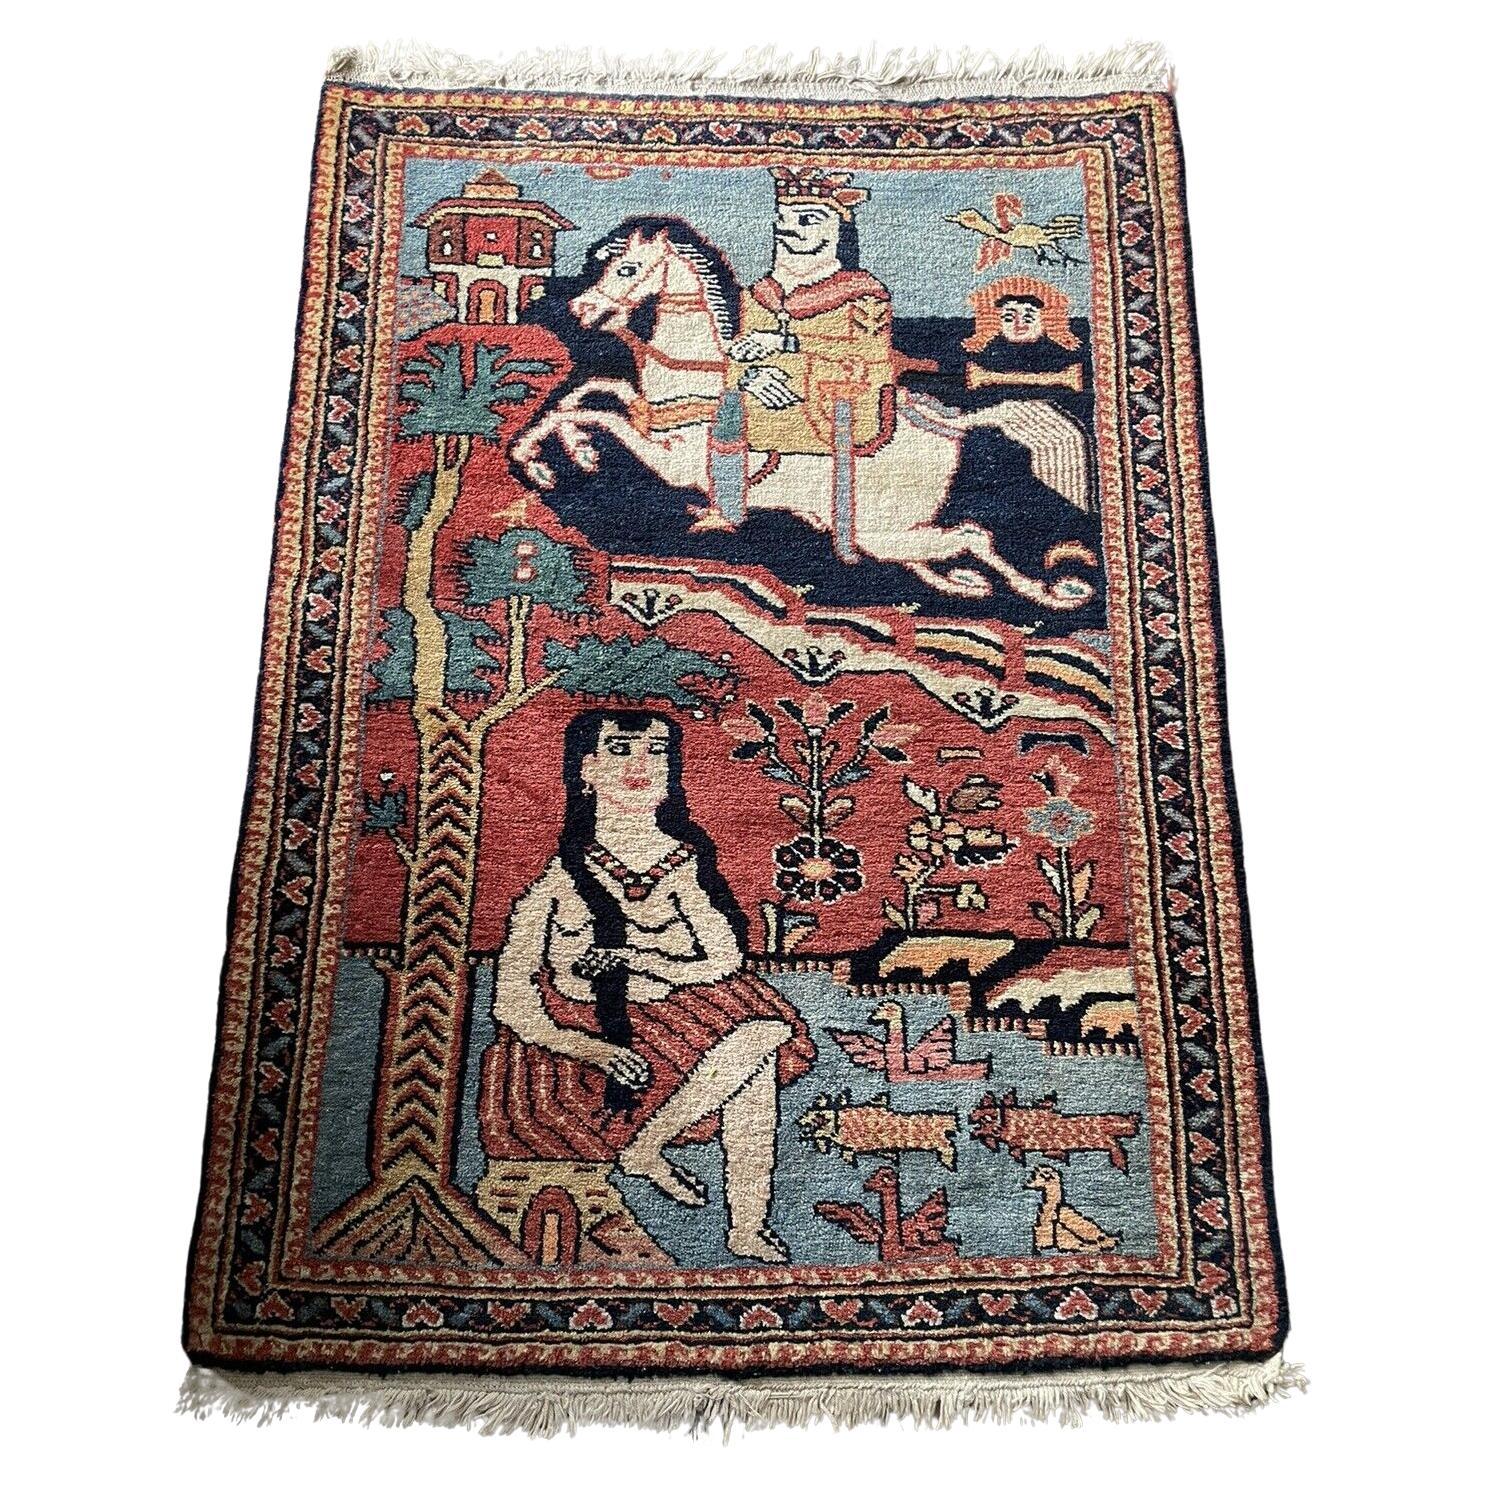 Handmade Antique Persian Style Lilihan Collectible Rug 2.2' x 3.1', 1920s - 1N01 For Sale